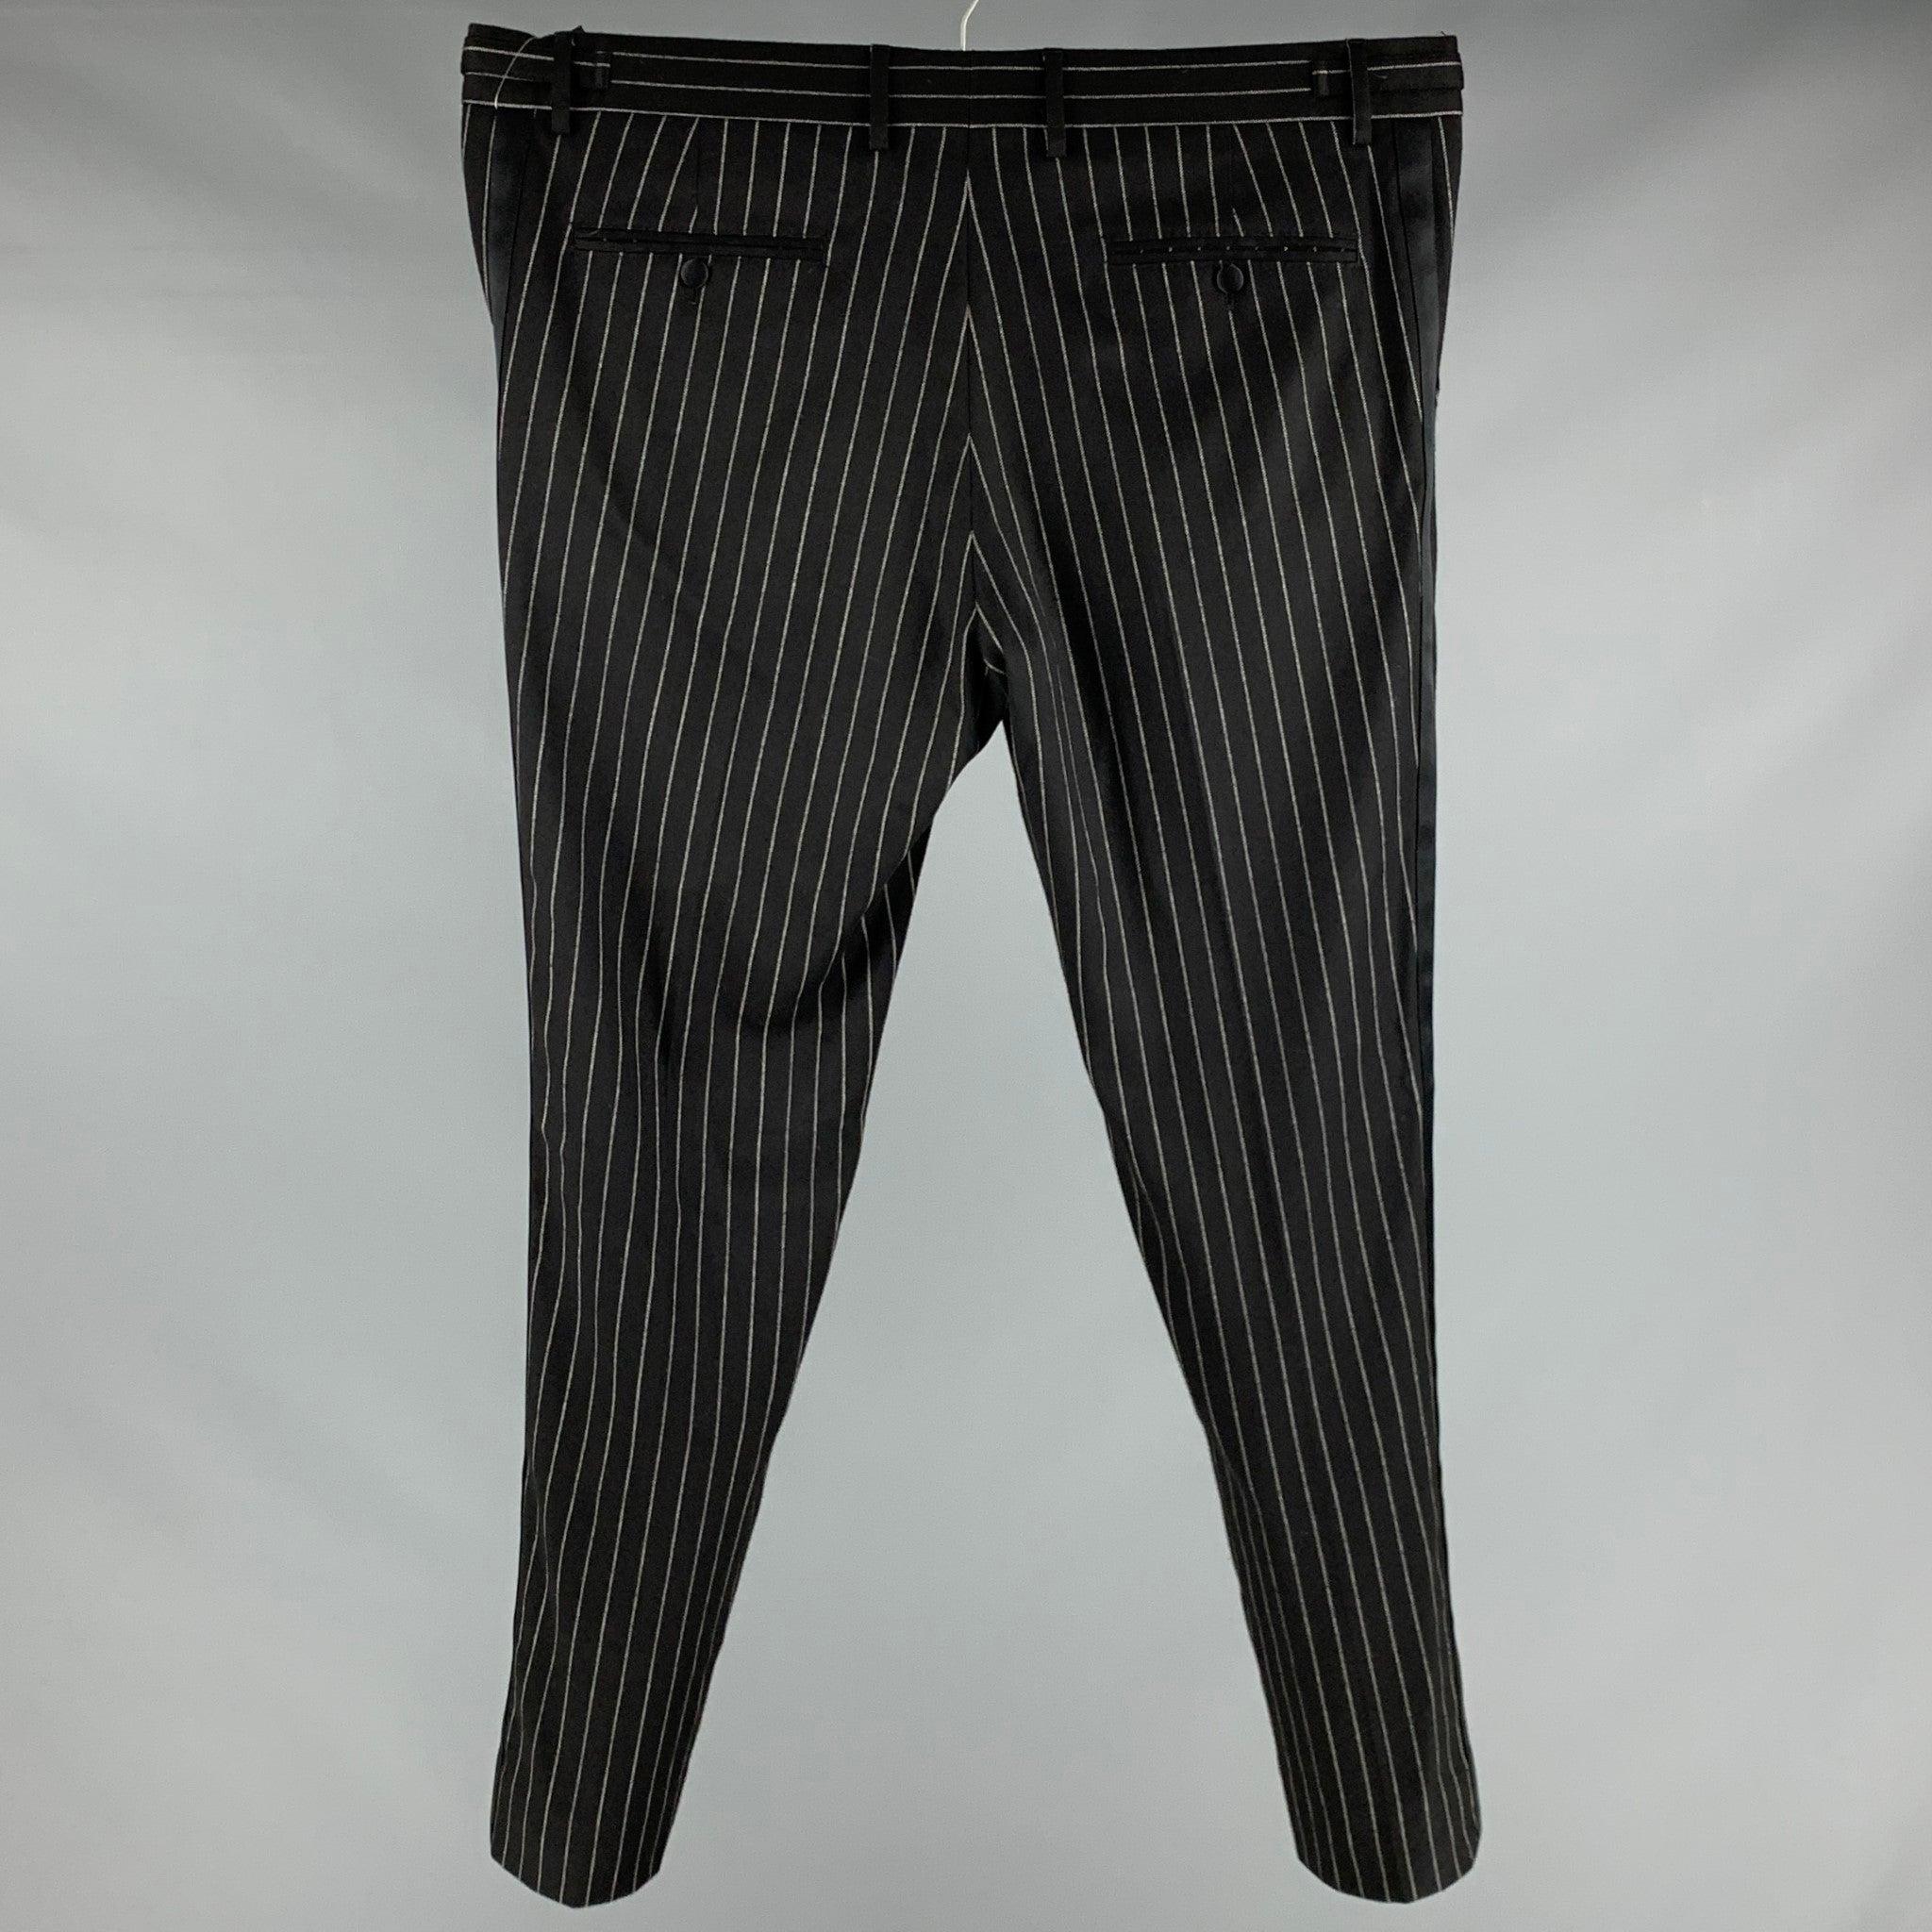 DOLCE & GABBANA Size 36 Black White Stripe Wool Blend Tuxedo Dress Pants In Excellent Condition For Sale In San Francisco, CA